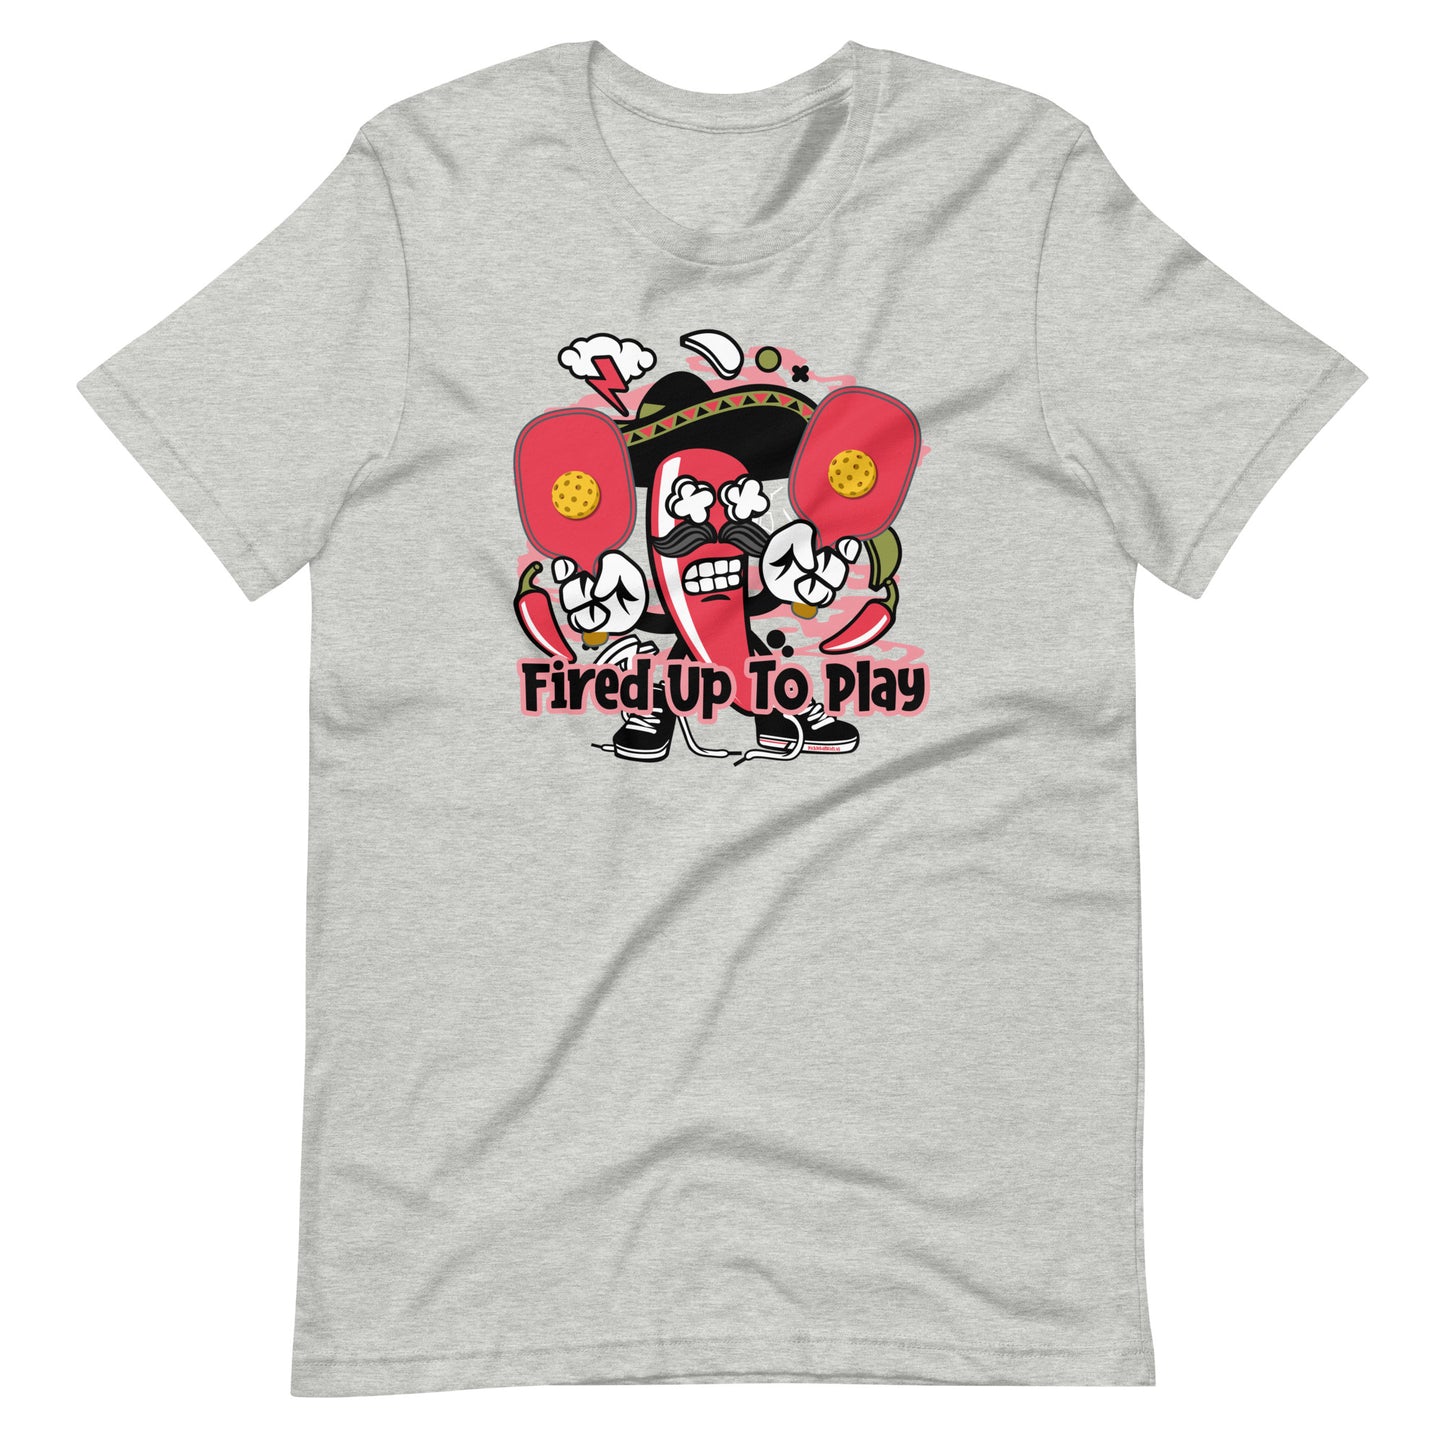 Retro-Vintage Fun Pickleball "Fired Up To Play" Unisex T-Shirt